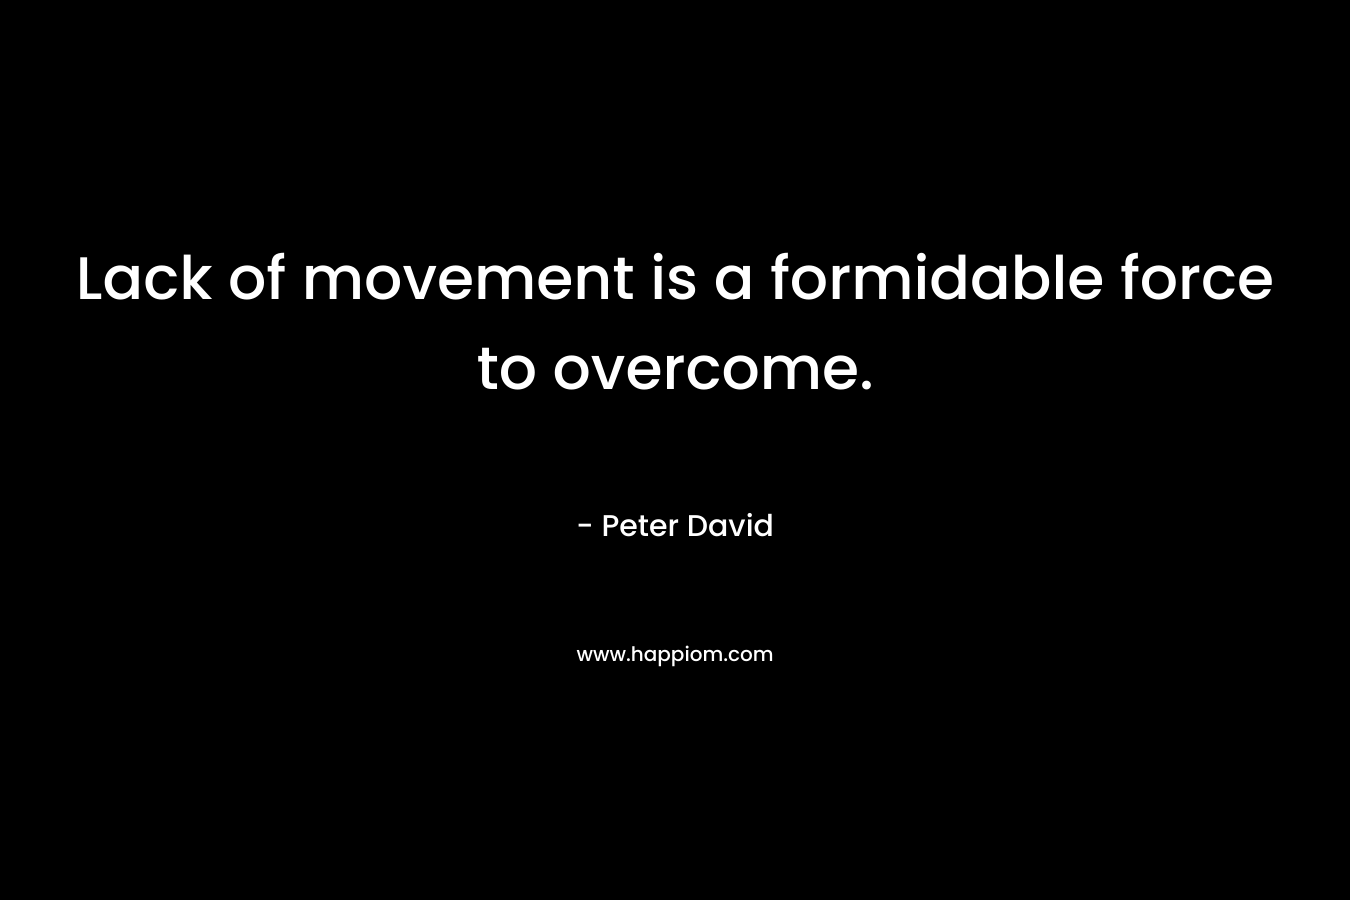 Lack of movement is a formidable force to overcome.